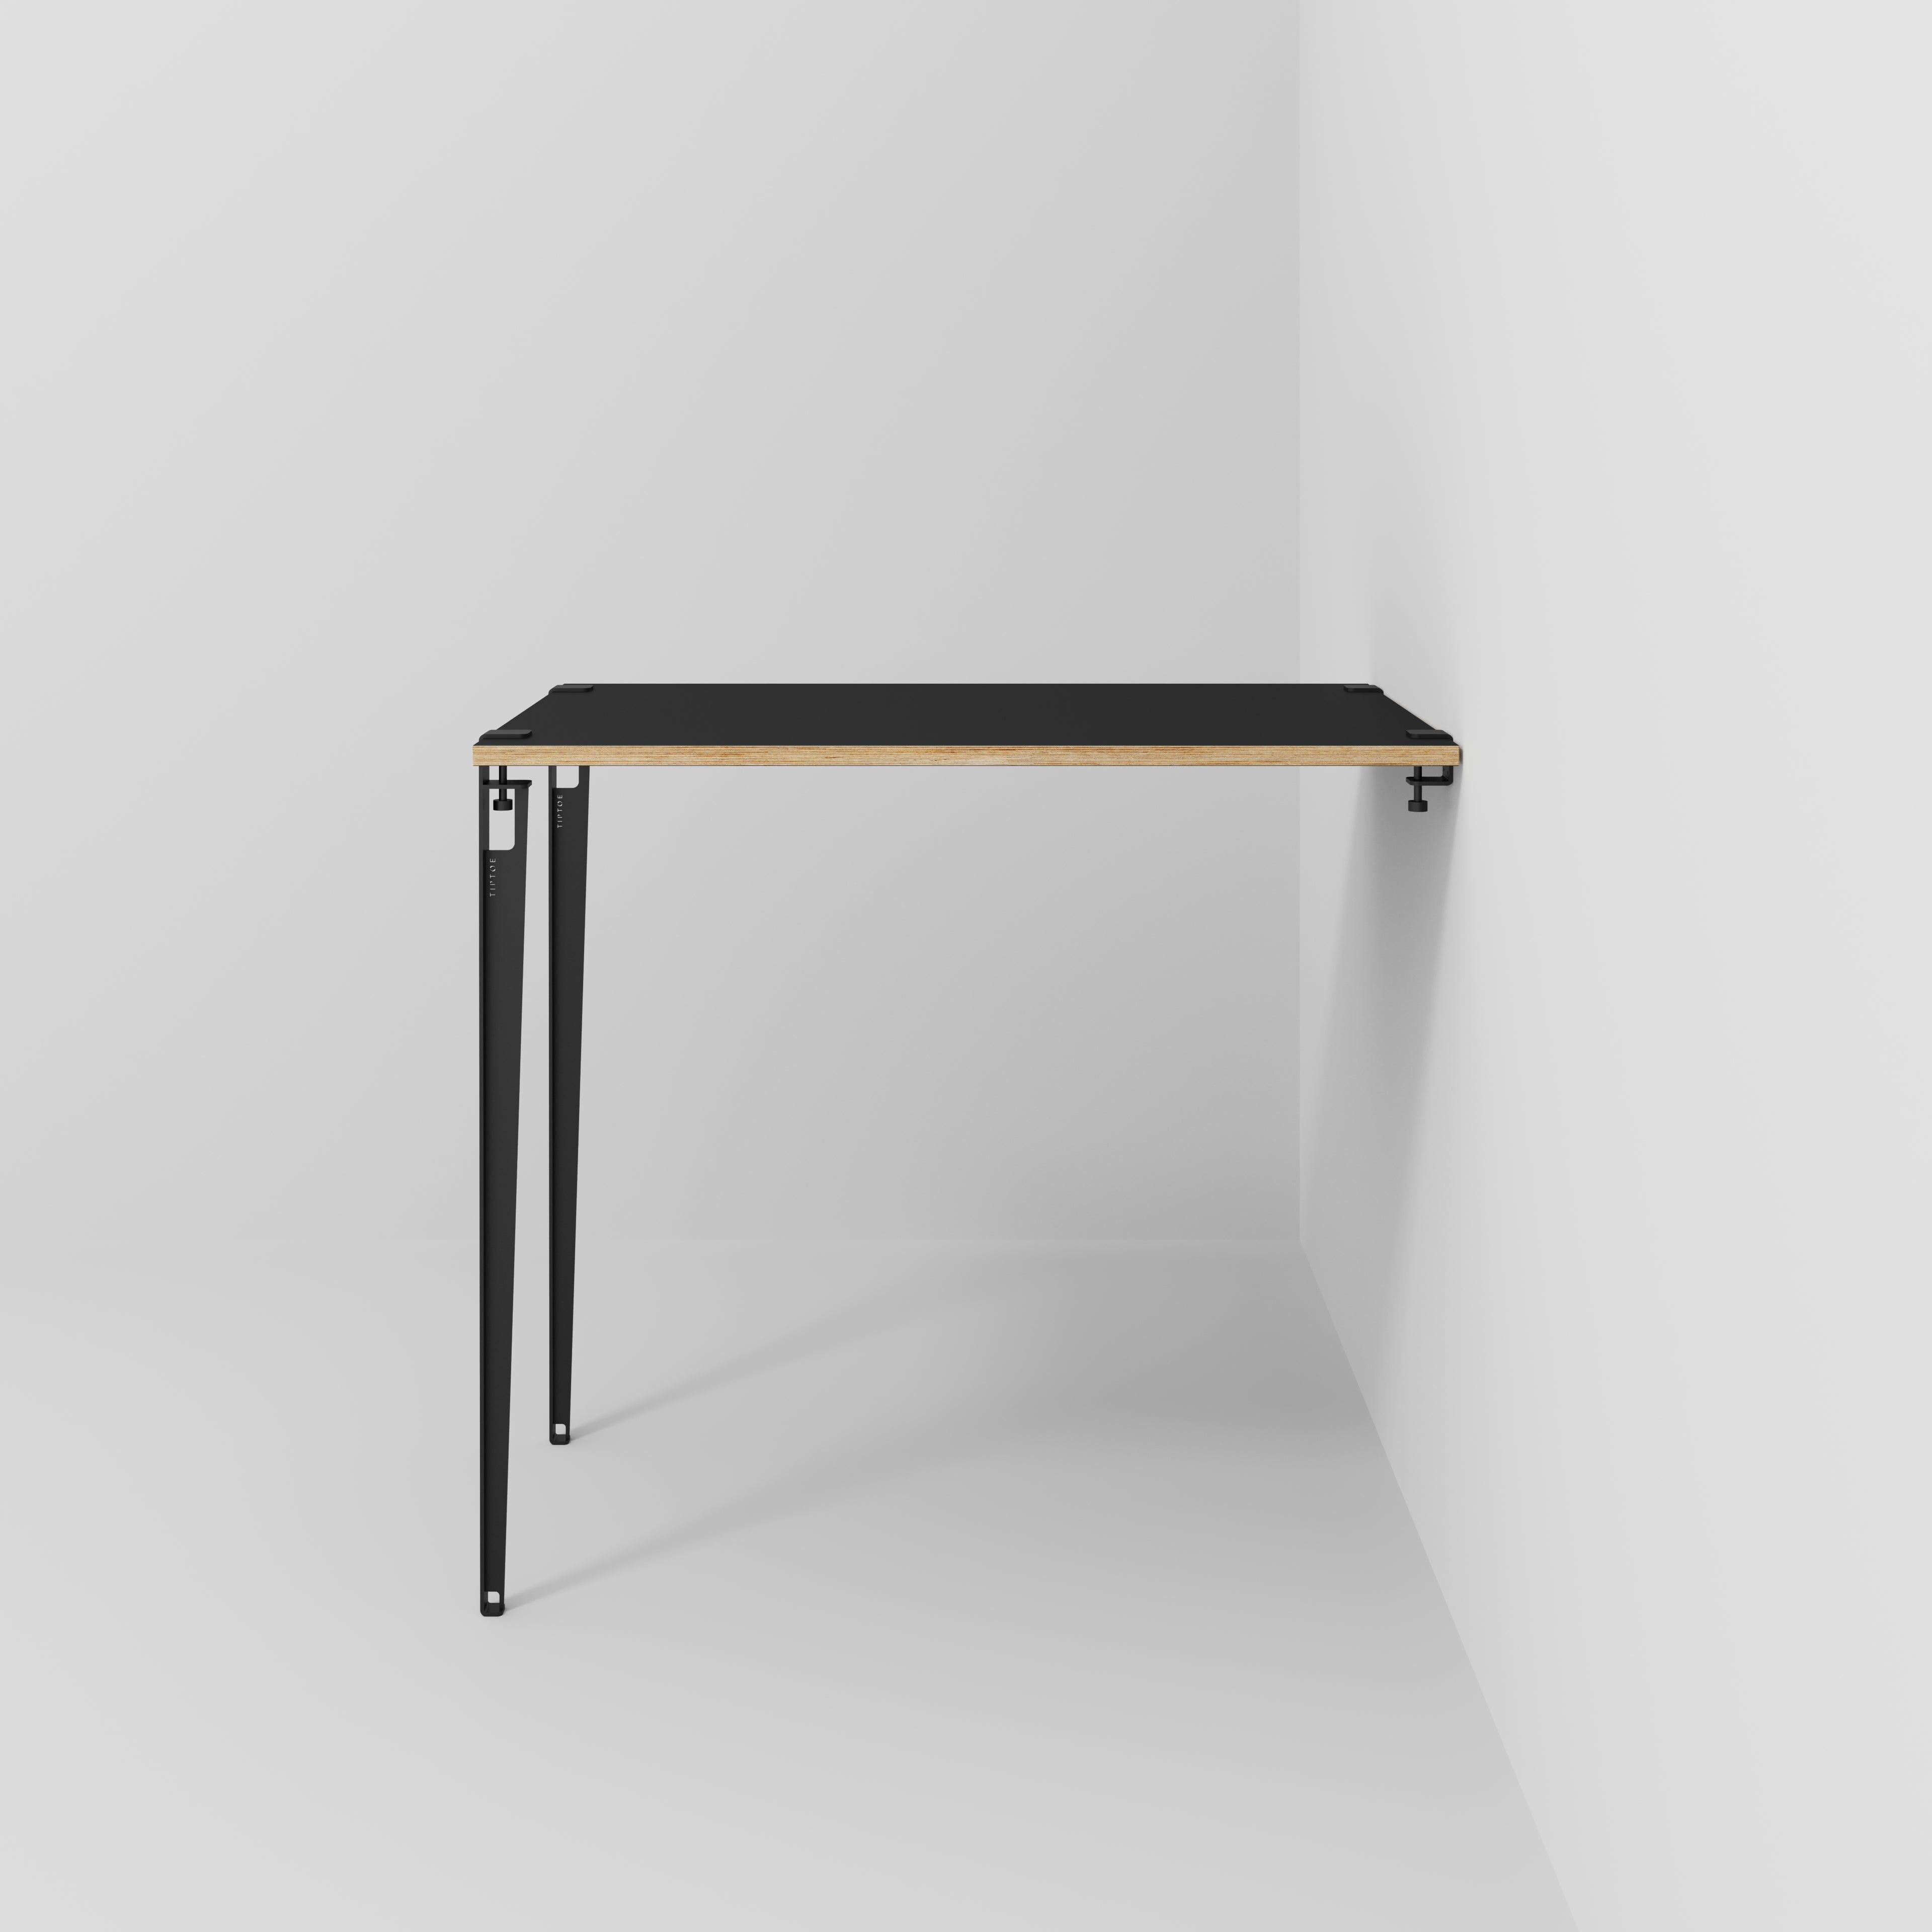 Wall Table with Black Tiptoe Legs and Brackets - Formica Diamond Black - 1200(w) x 800(d) x 1100(h)